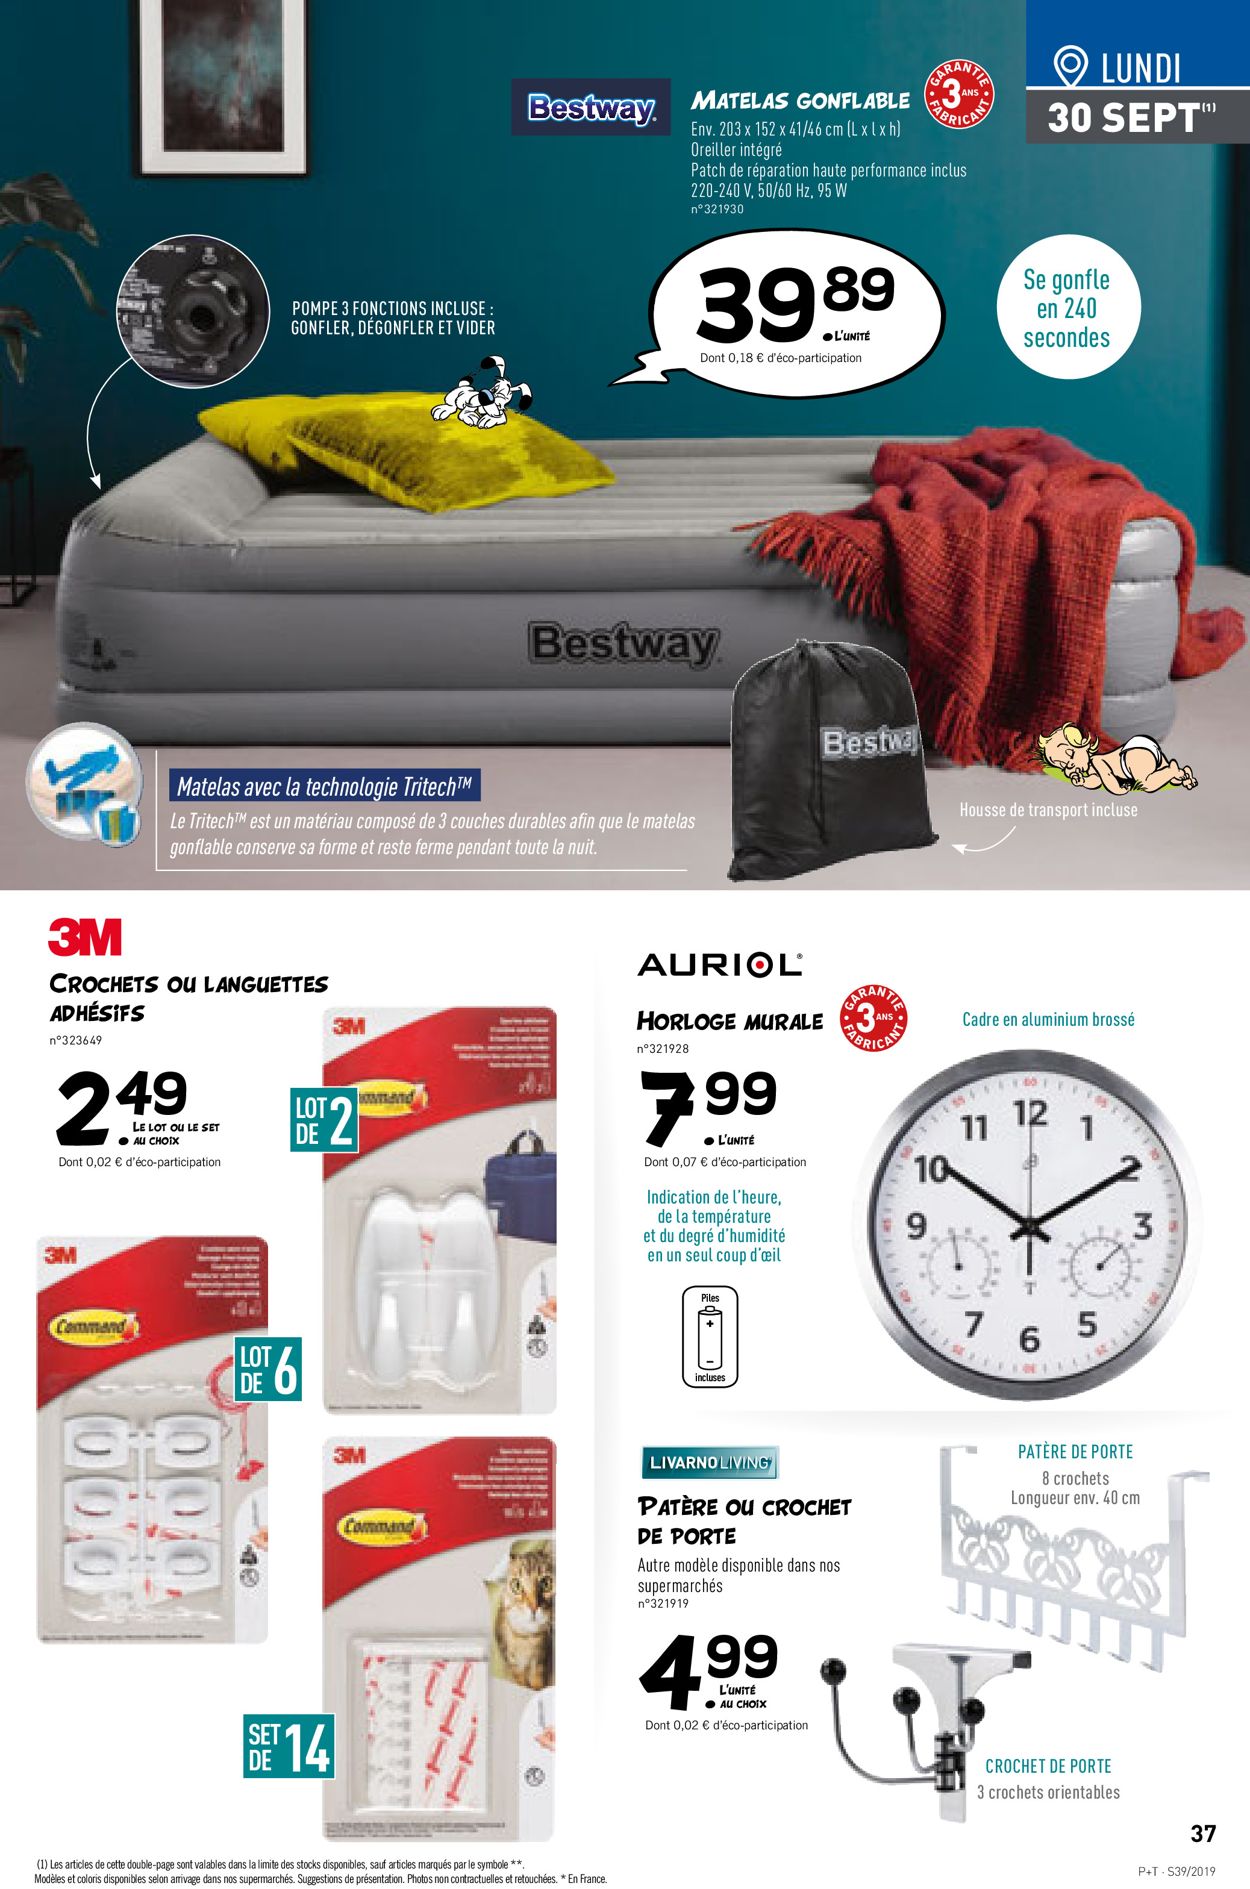 Lidl Catalogue - 25.09-01.10.2019 (Page 37)